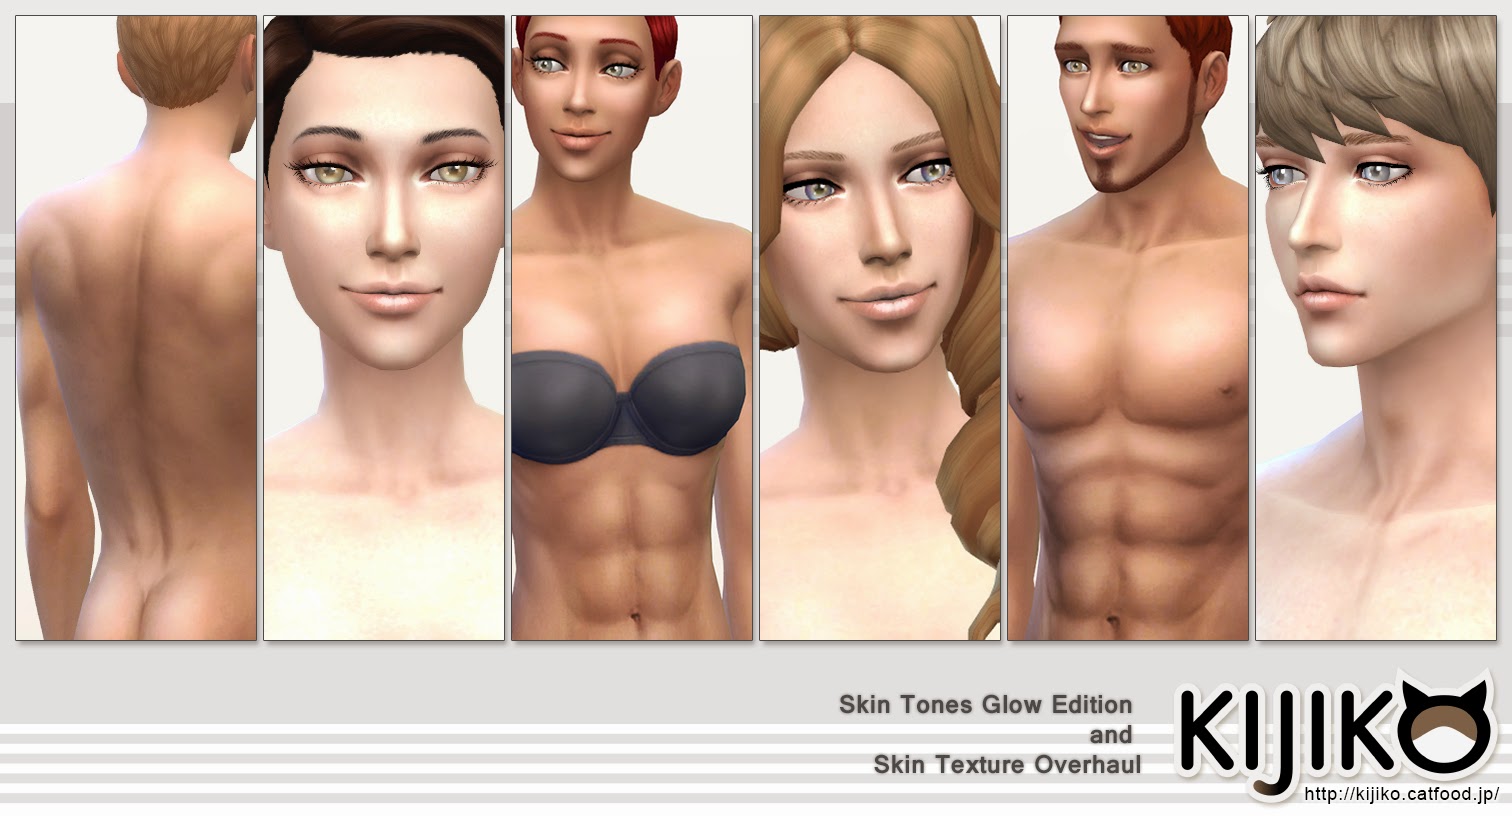 My Sims 4 Blog Skin Tones Glow Edition and Skin Texture